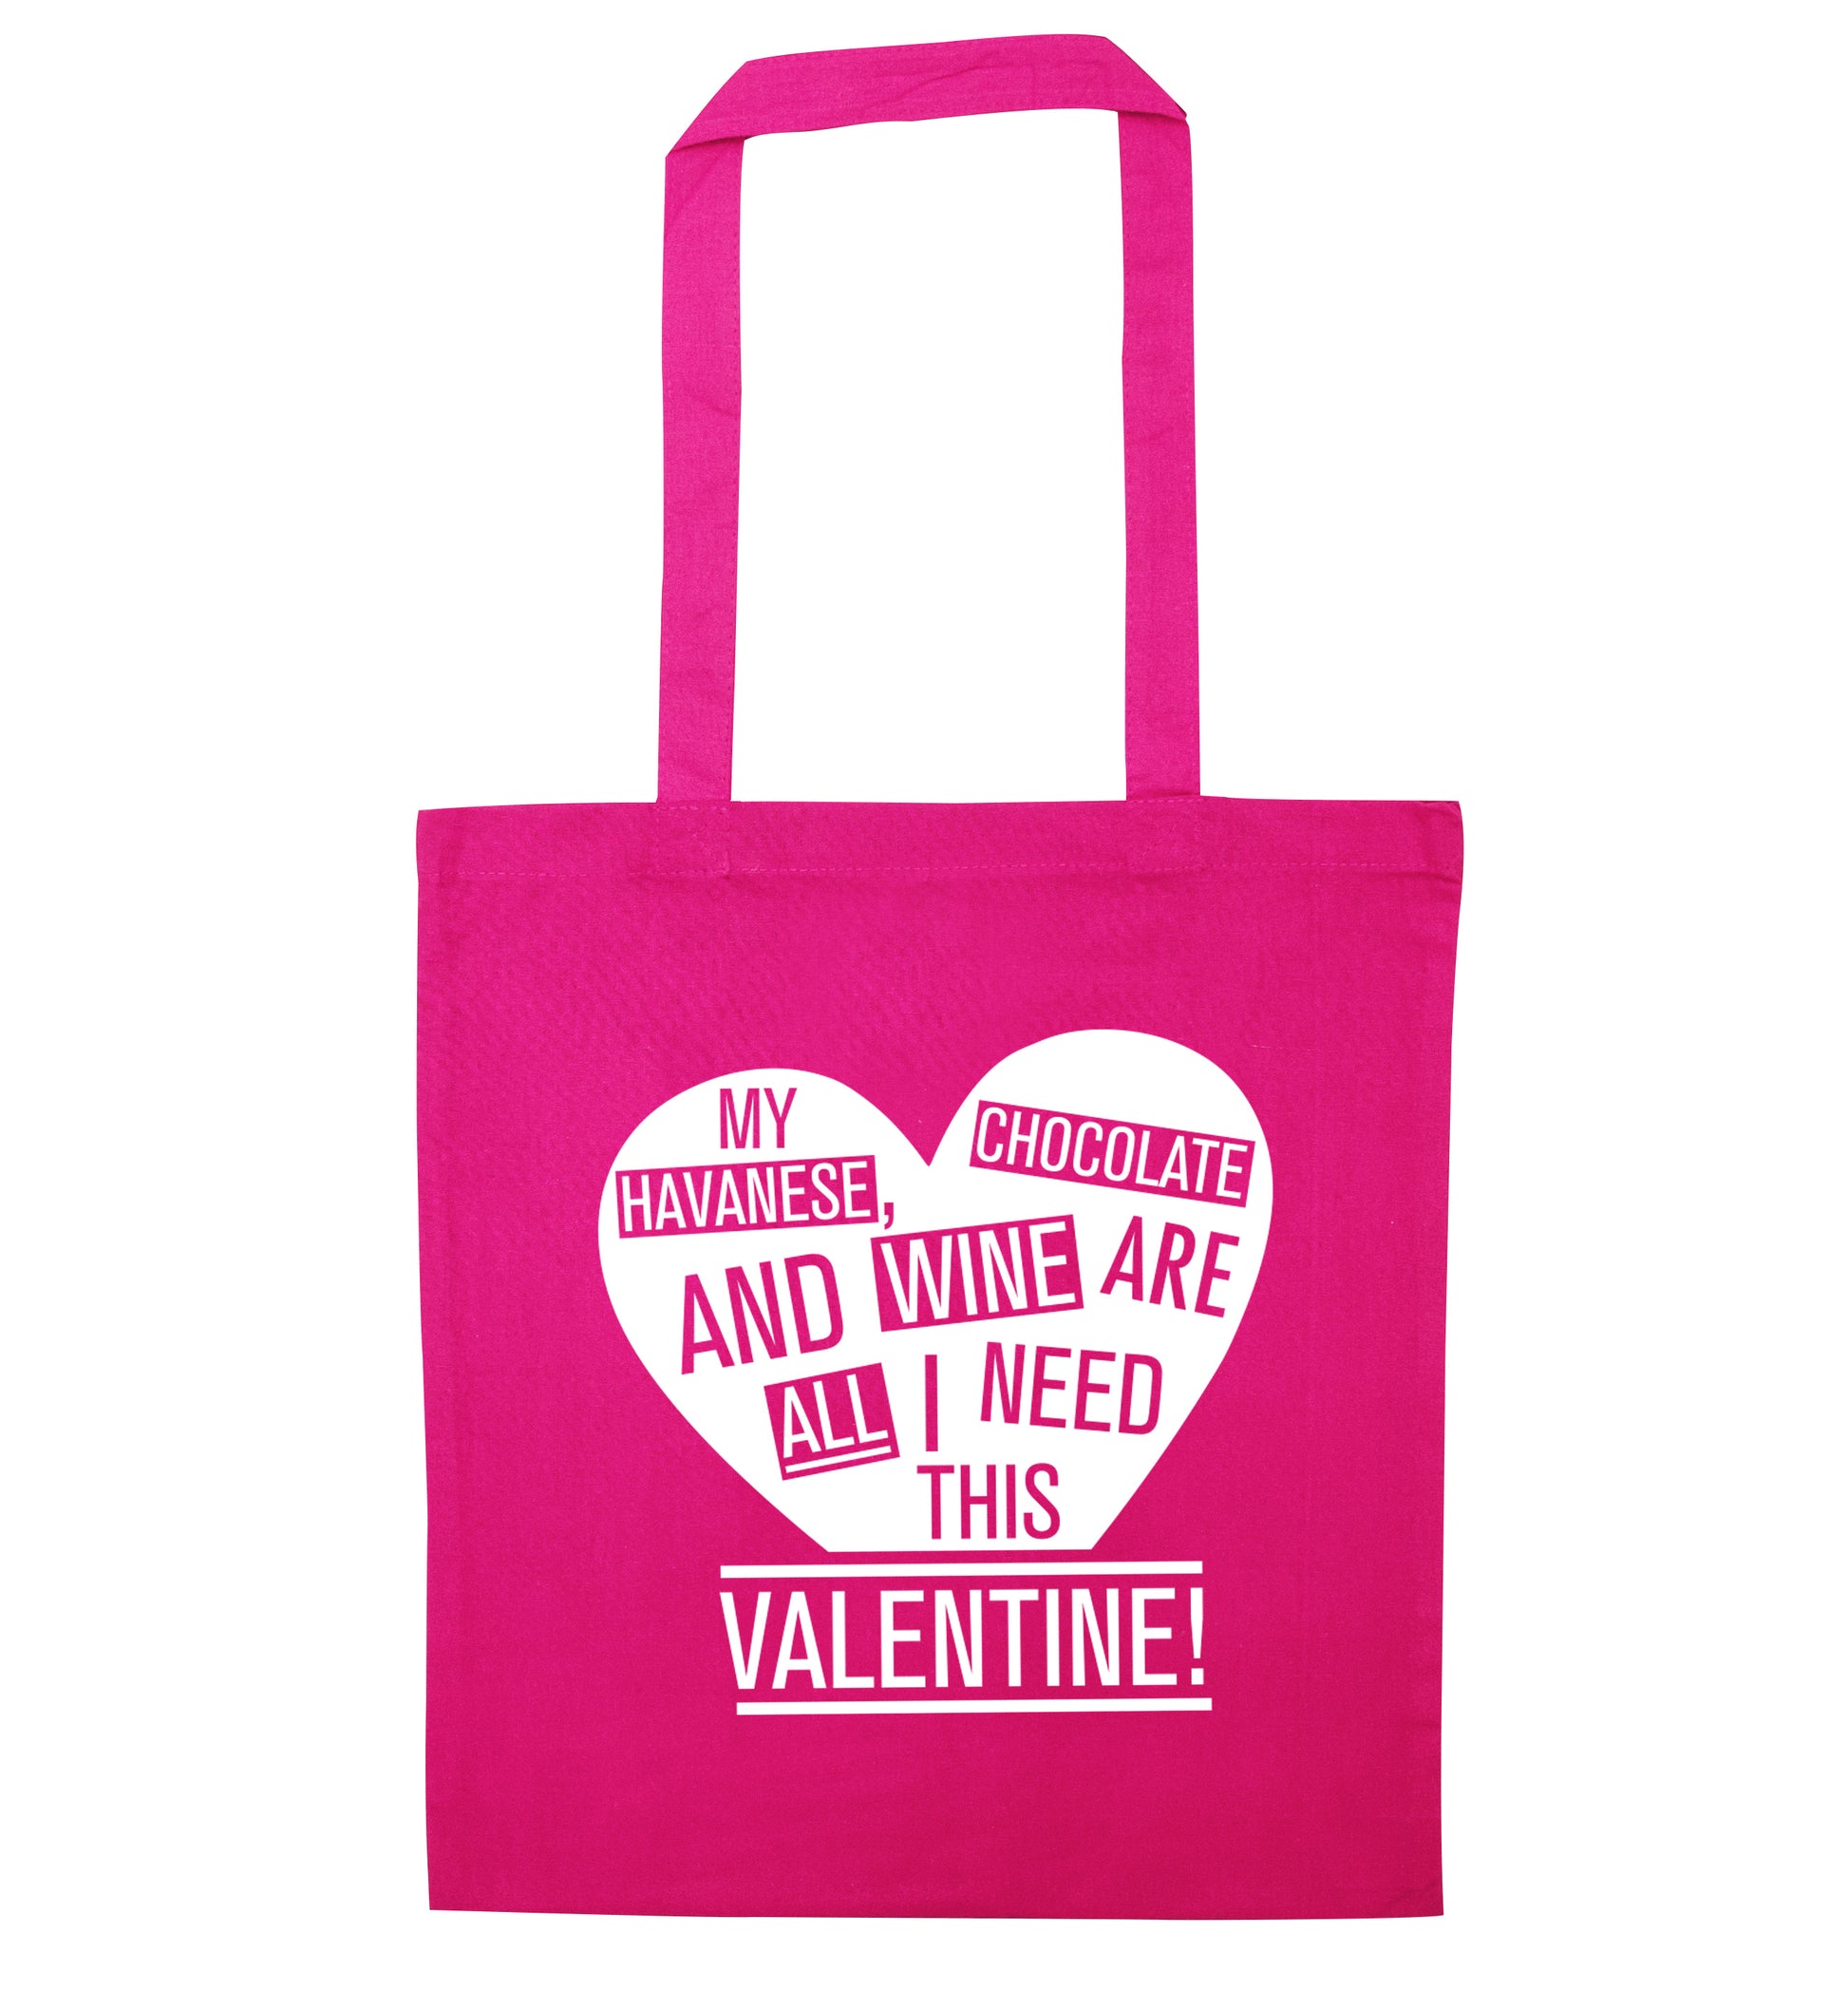 My havanese, chocolate and wine are all I need this valentine! pink tote bag